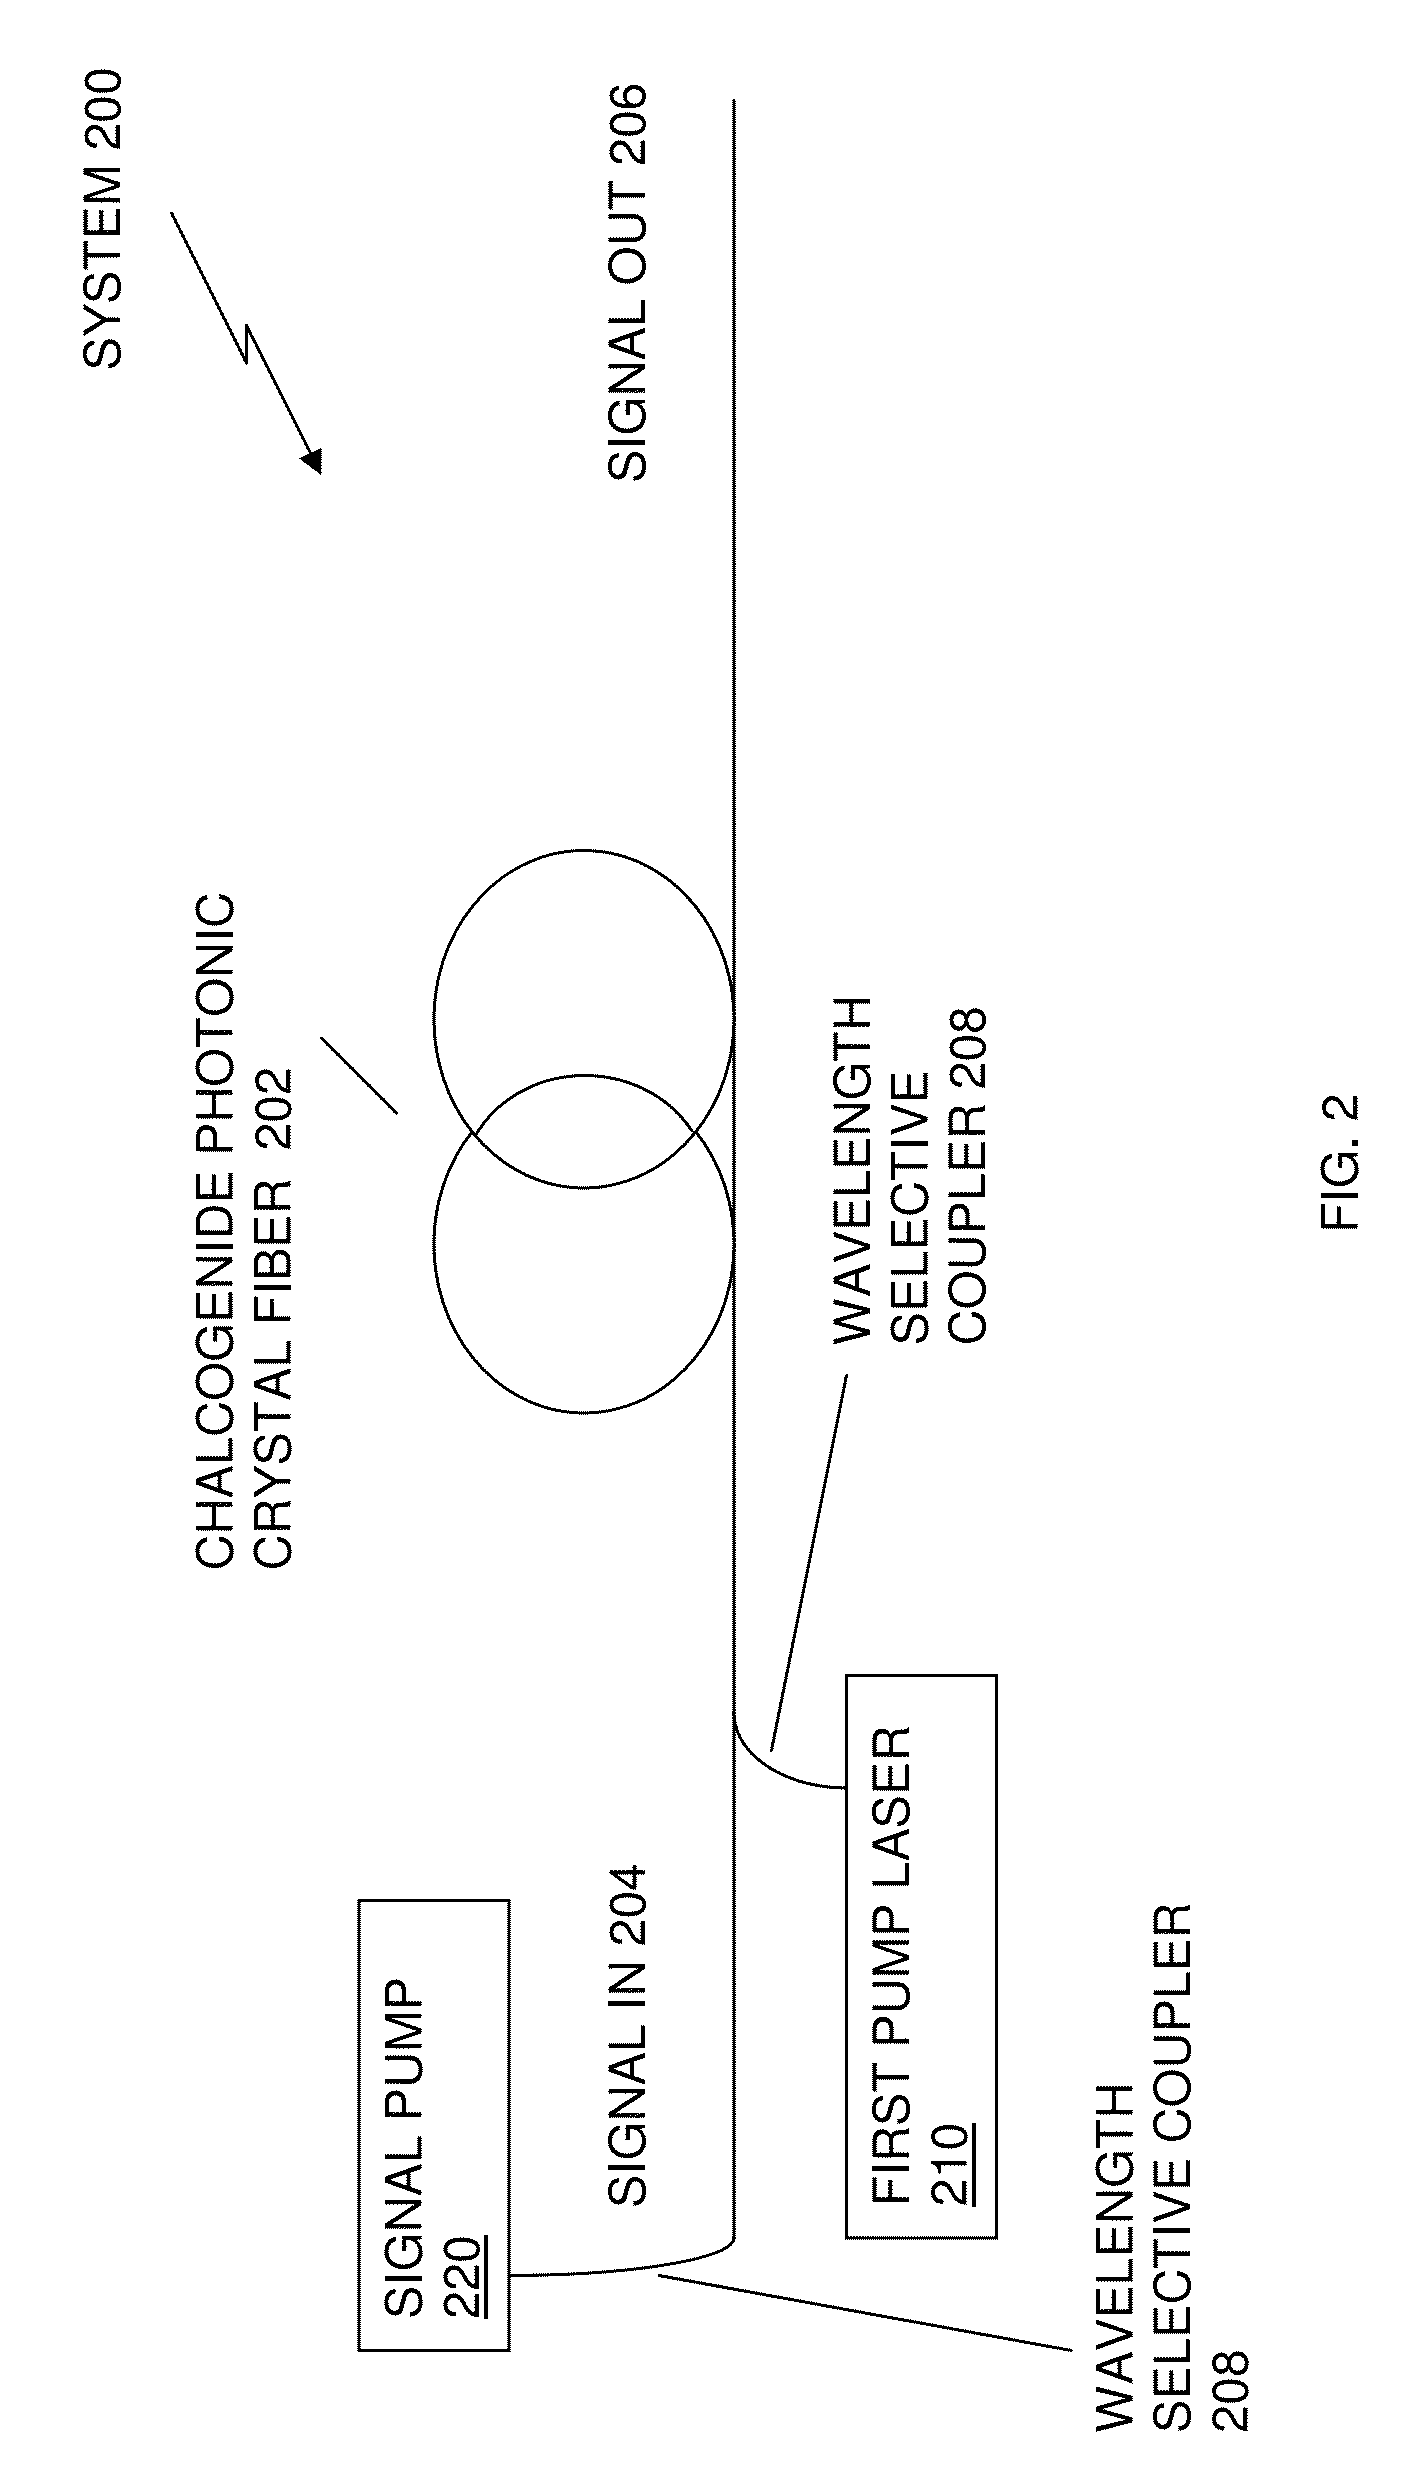 Systems and methods of achieving high brightness infrared fiber parametric amplifiers and light sources